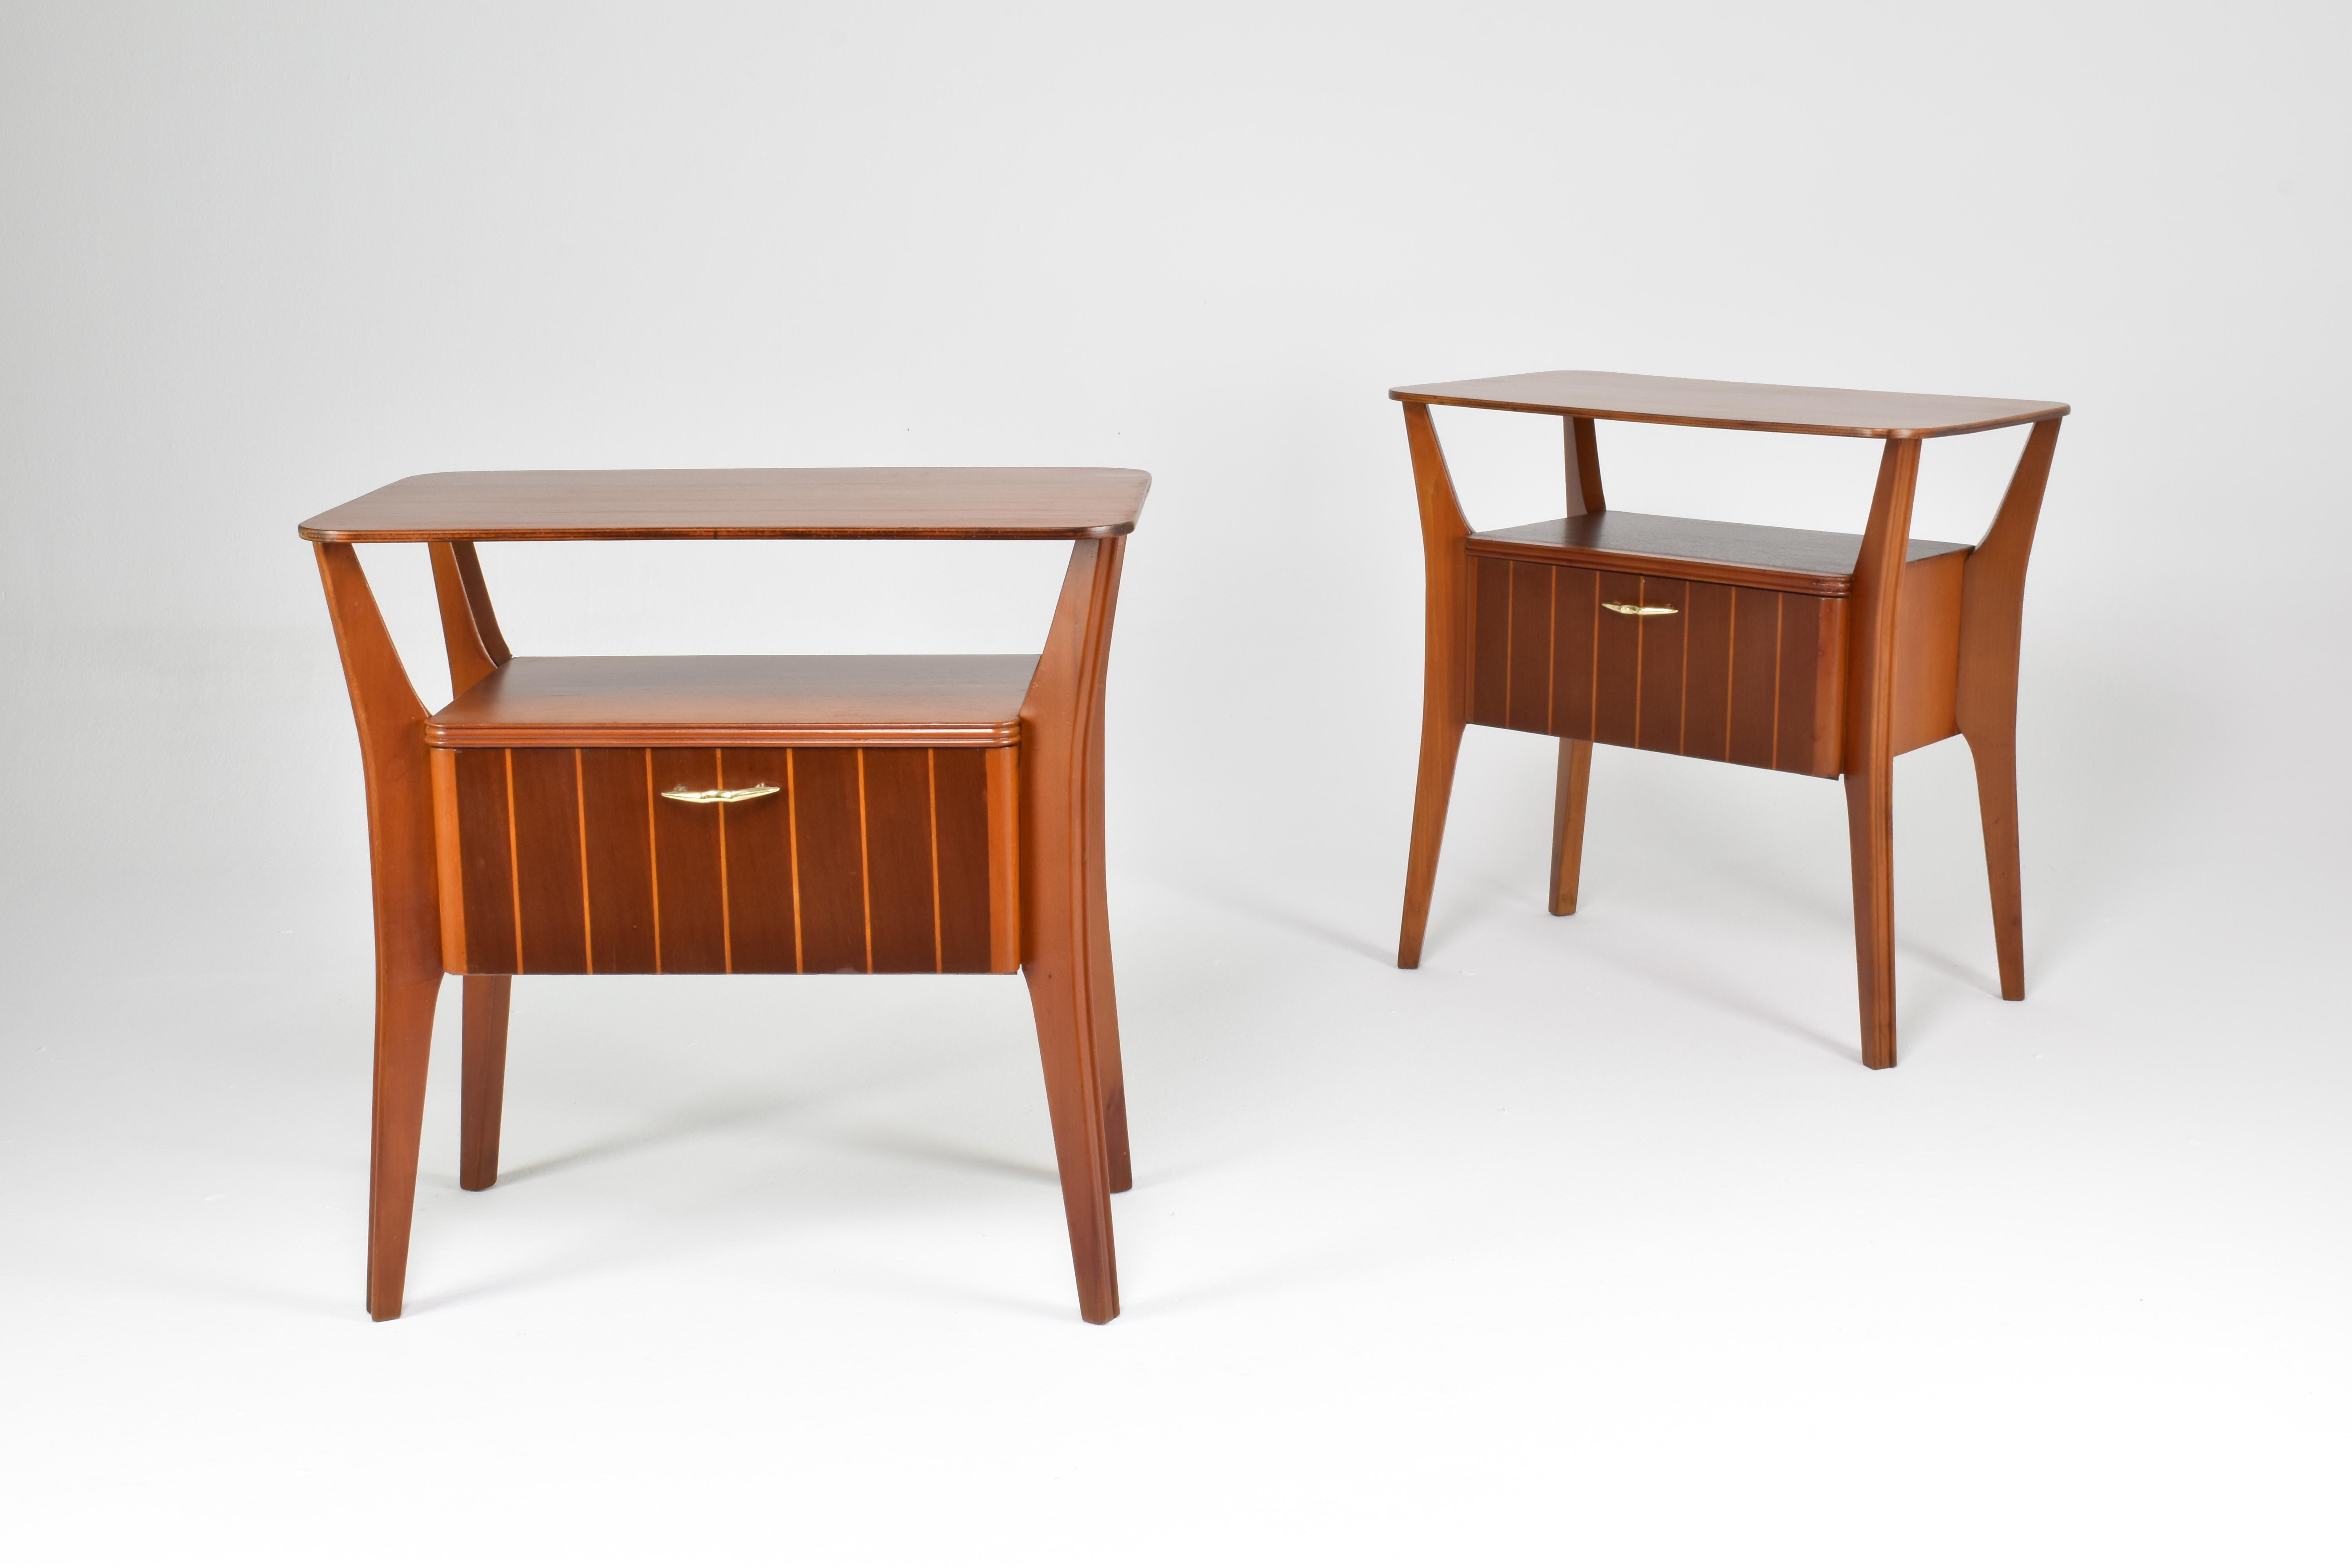 Pair of Italian Maple Nightstands Attributed to Gio Ponti for Cantu, 1950s For Sale 3